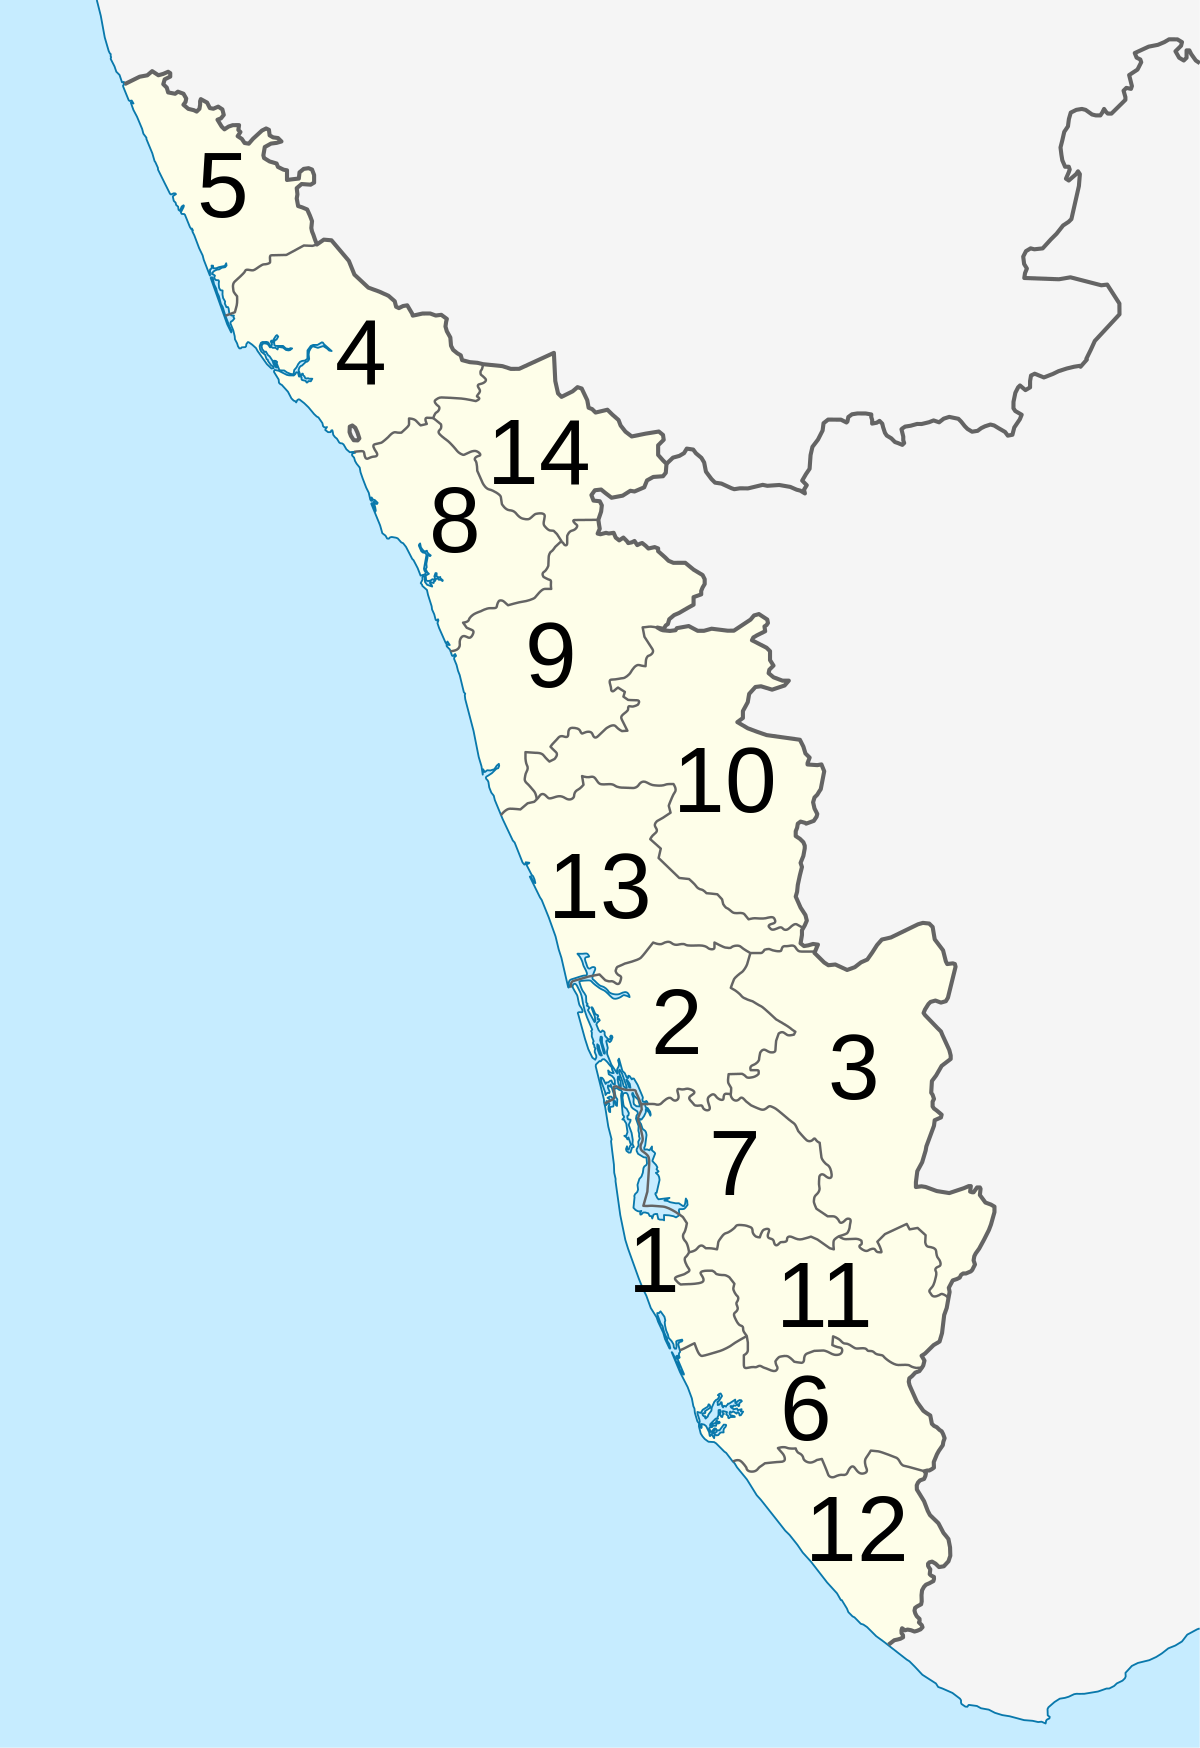 File:India Kerala districts numbered.svg - Wikimedia Commons